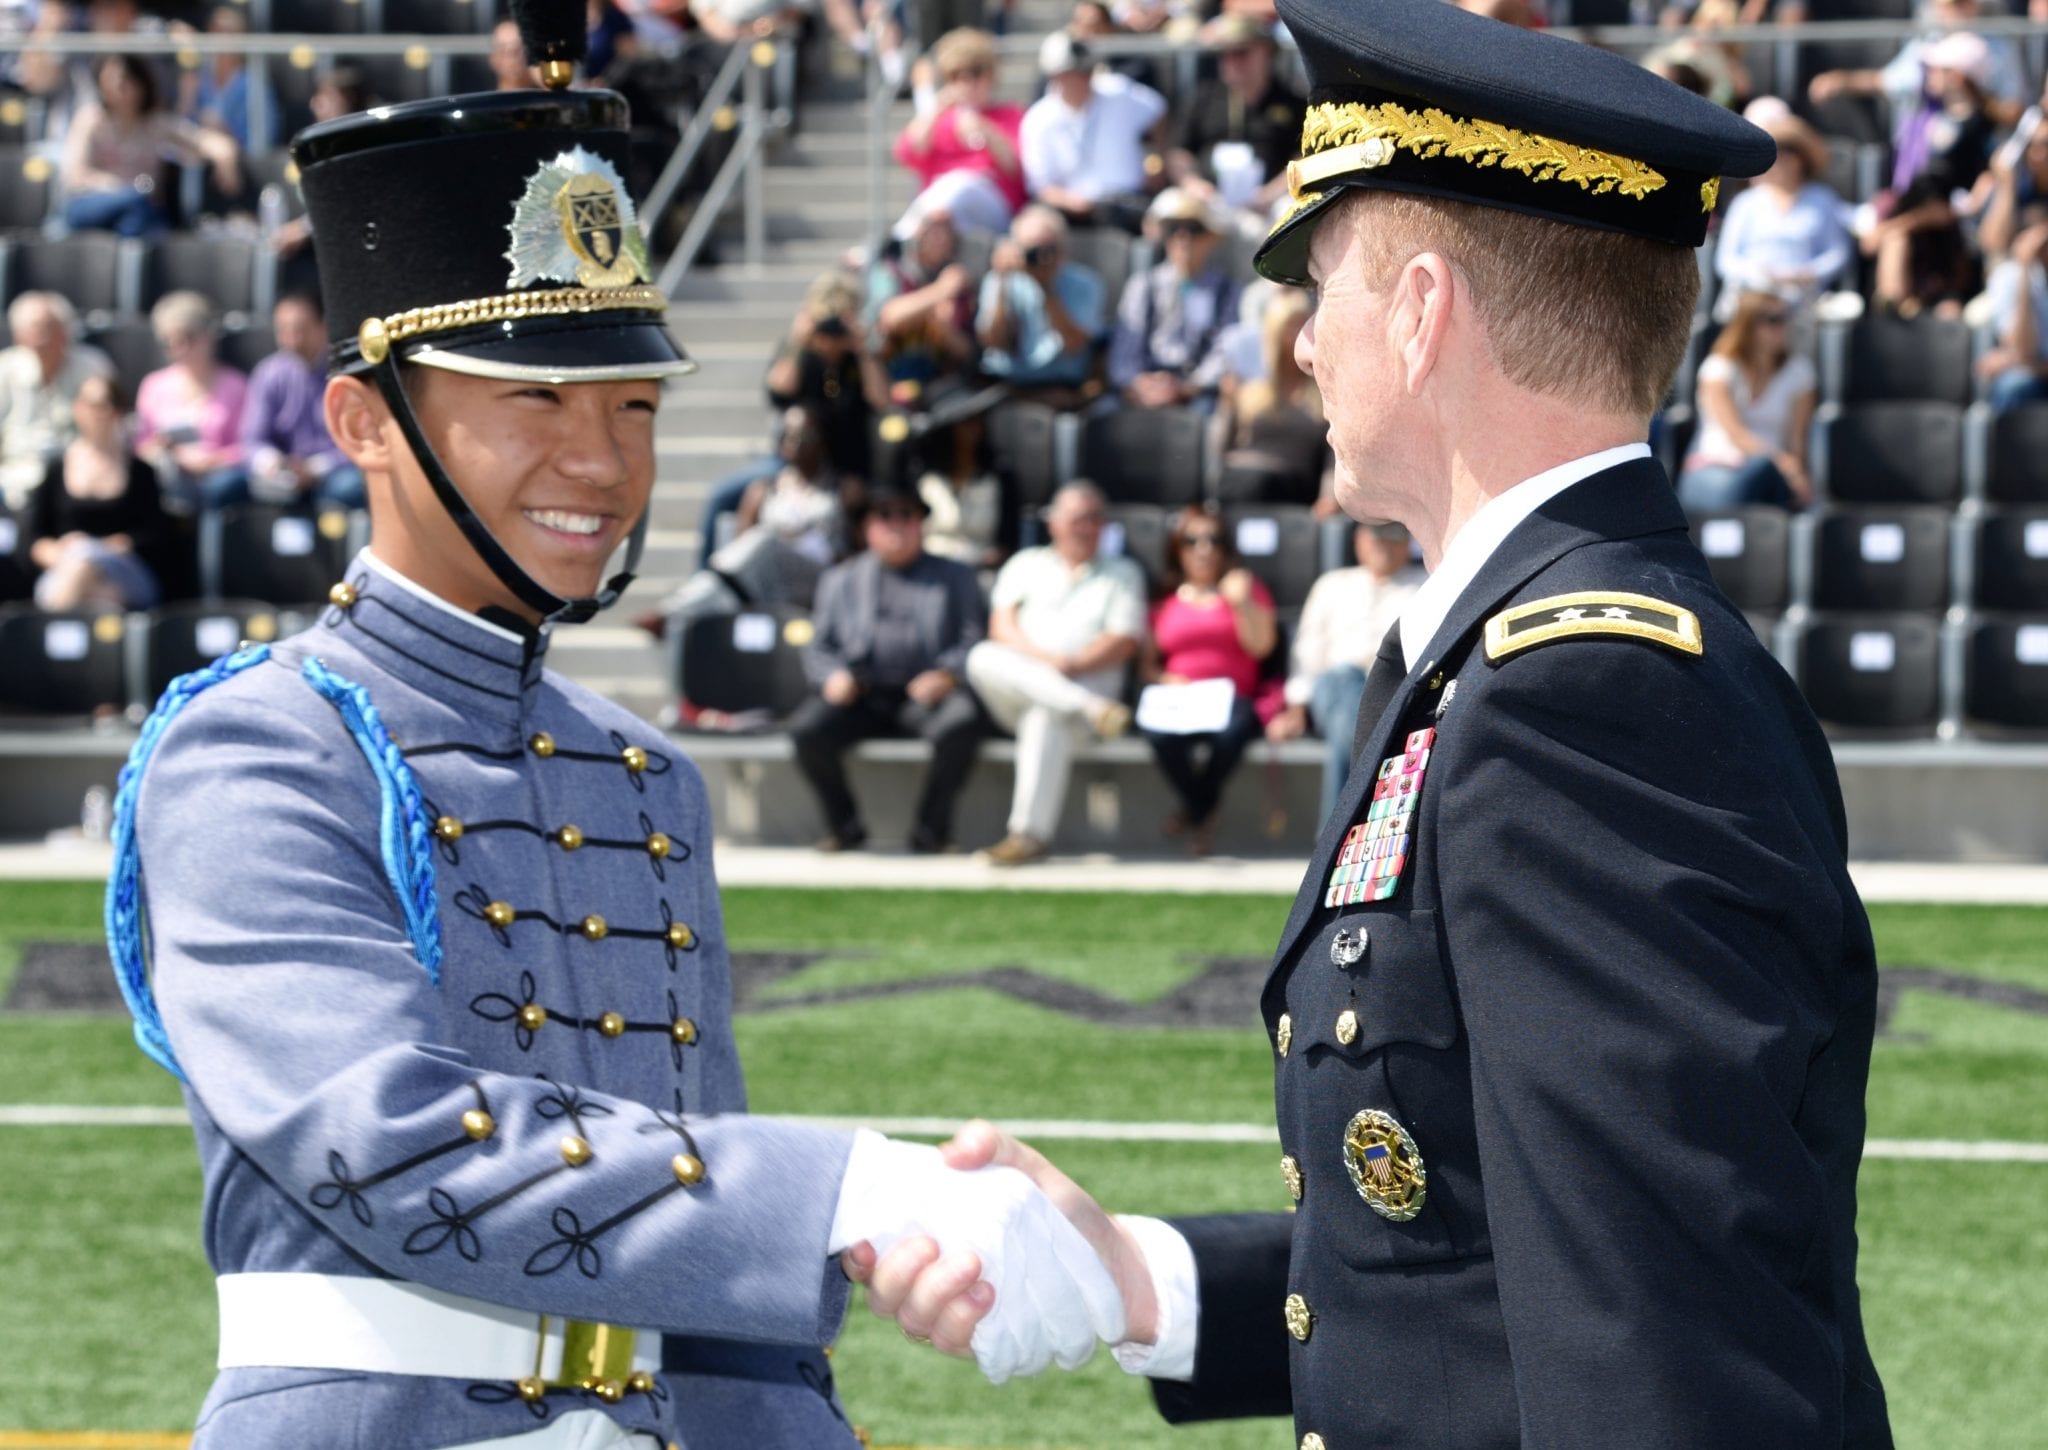 Gala Weekend Awards - MG Bartell and Cadet shaking hands